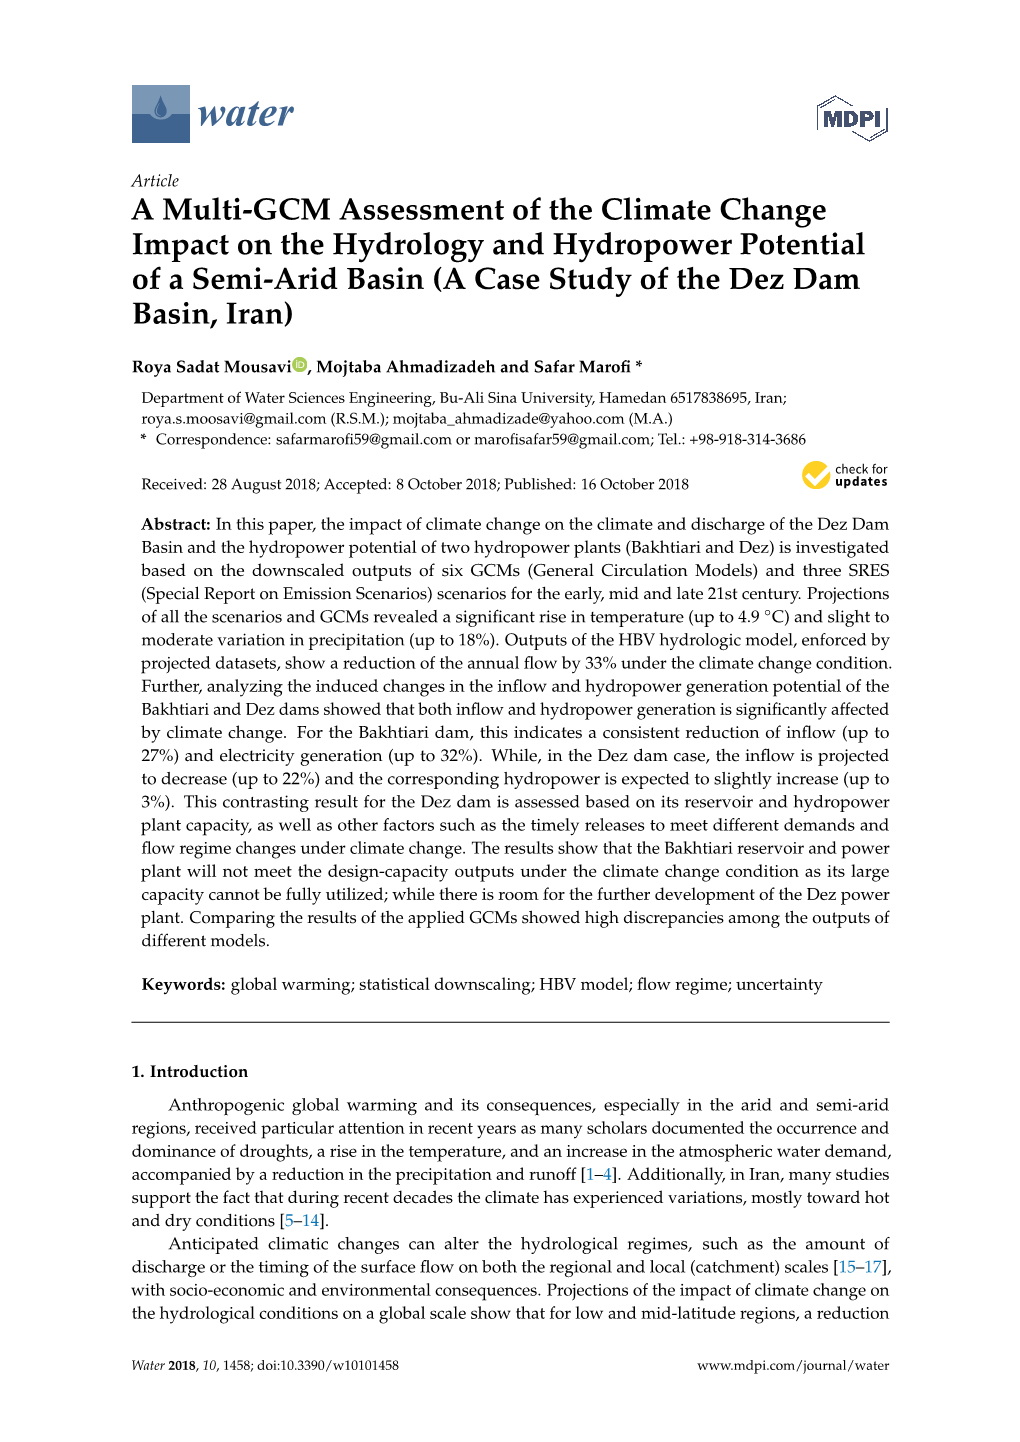 A Multi-GCM Assessment of the Climate Change Impact on the Hydrology and Hydropower Potential of a Semi-Arid Basin (A Case Study of the Dez Dam Basin, Iran)